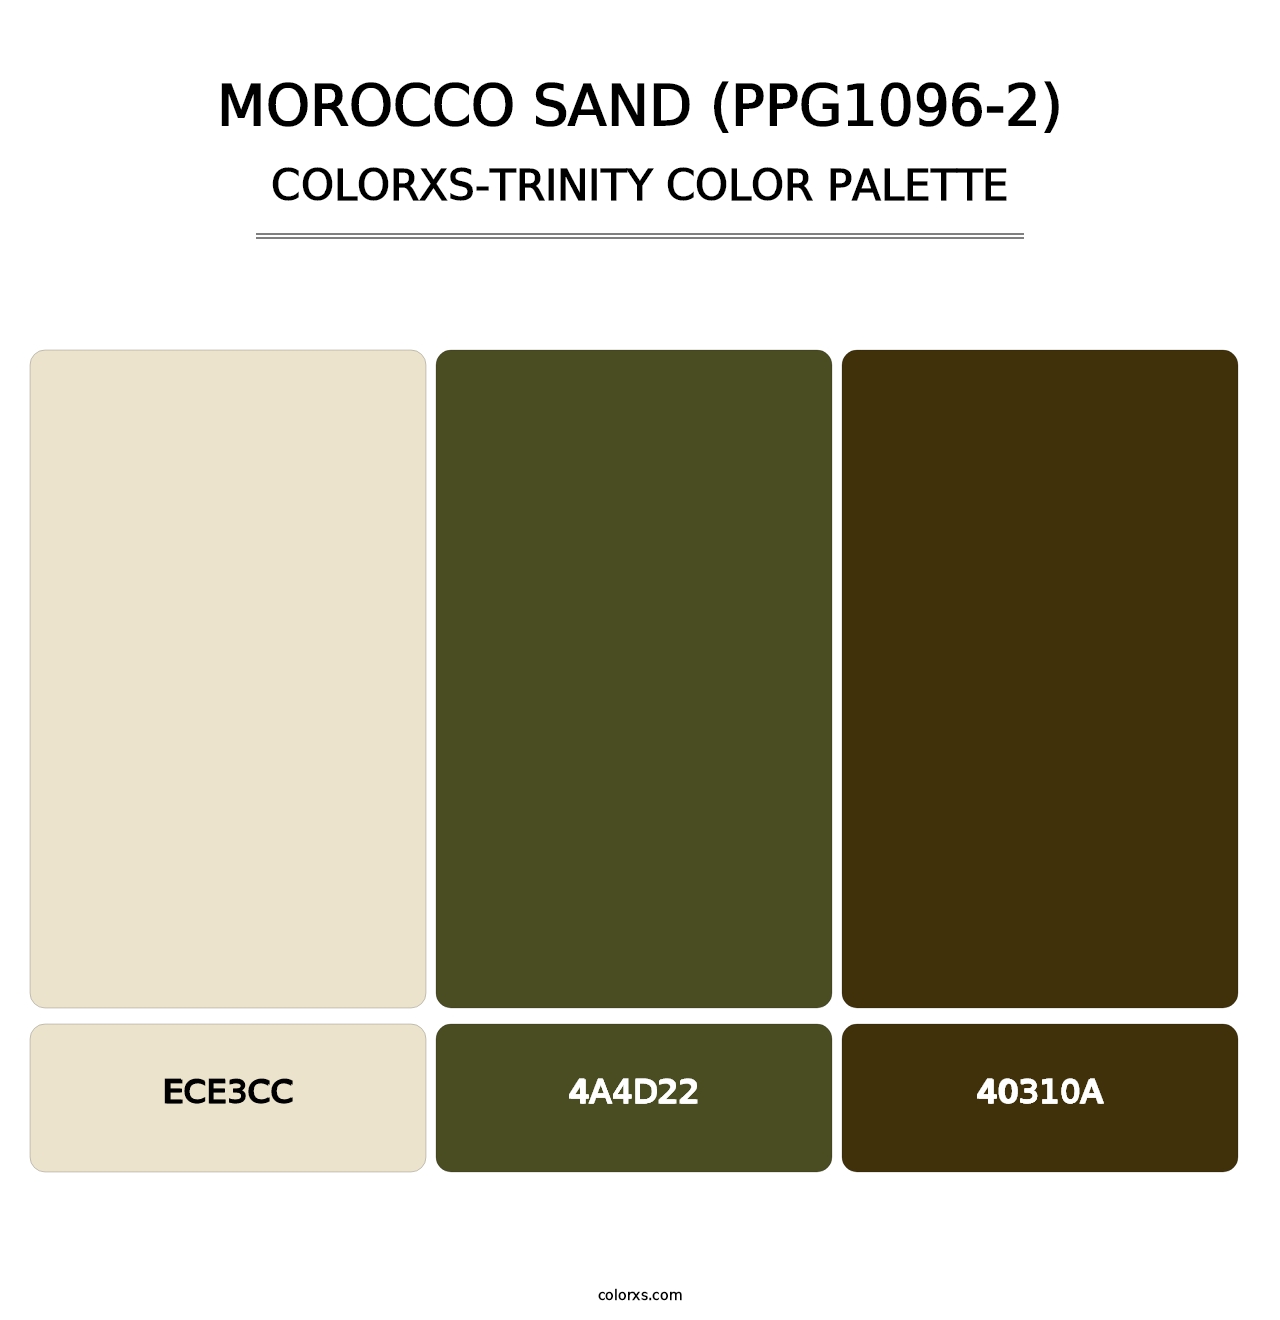 Morocco Sand (PPG1096-2) - Colorxs Trinity Palette